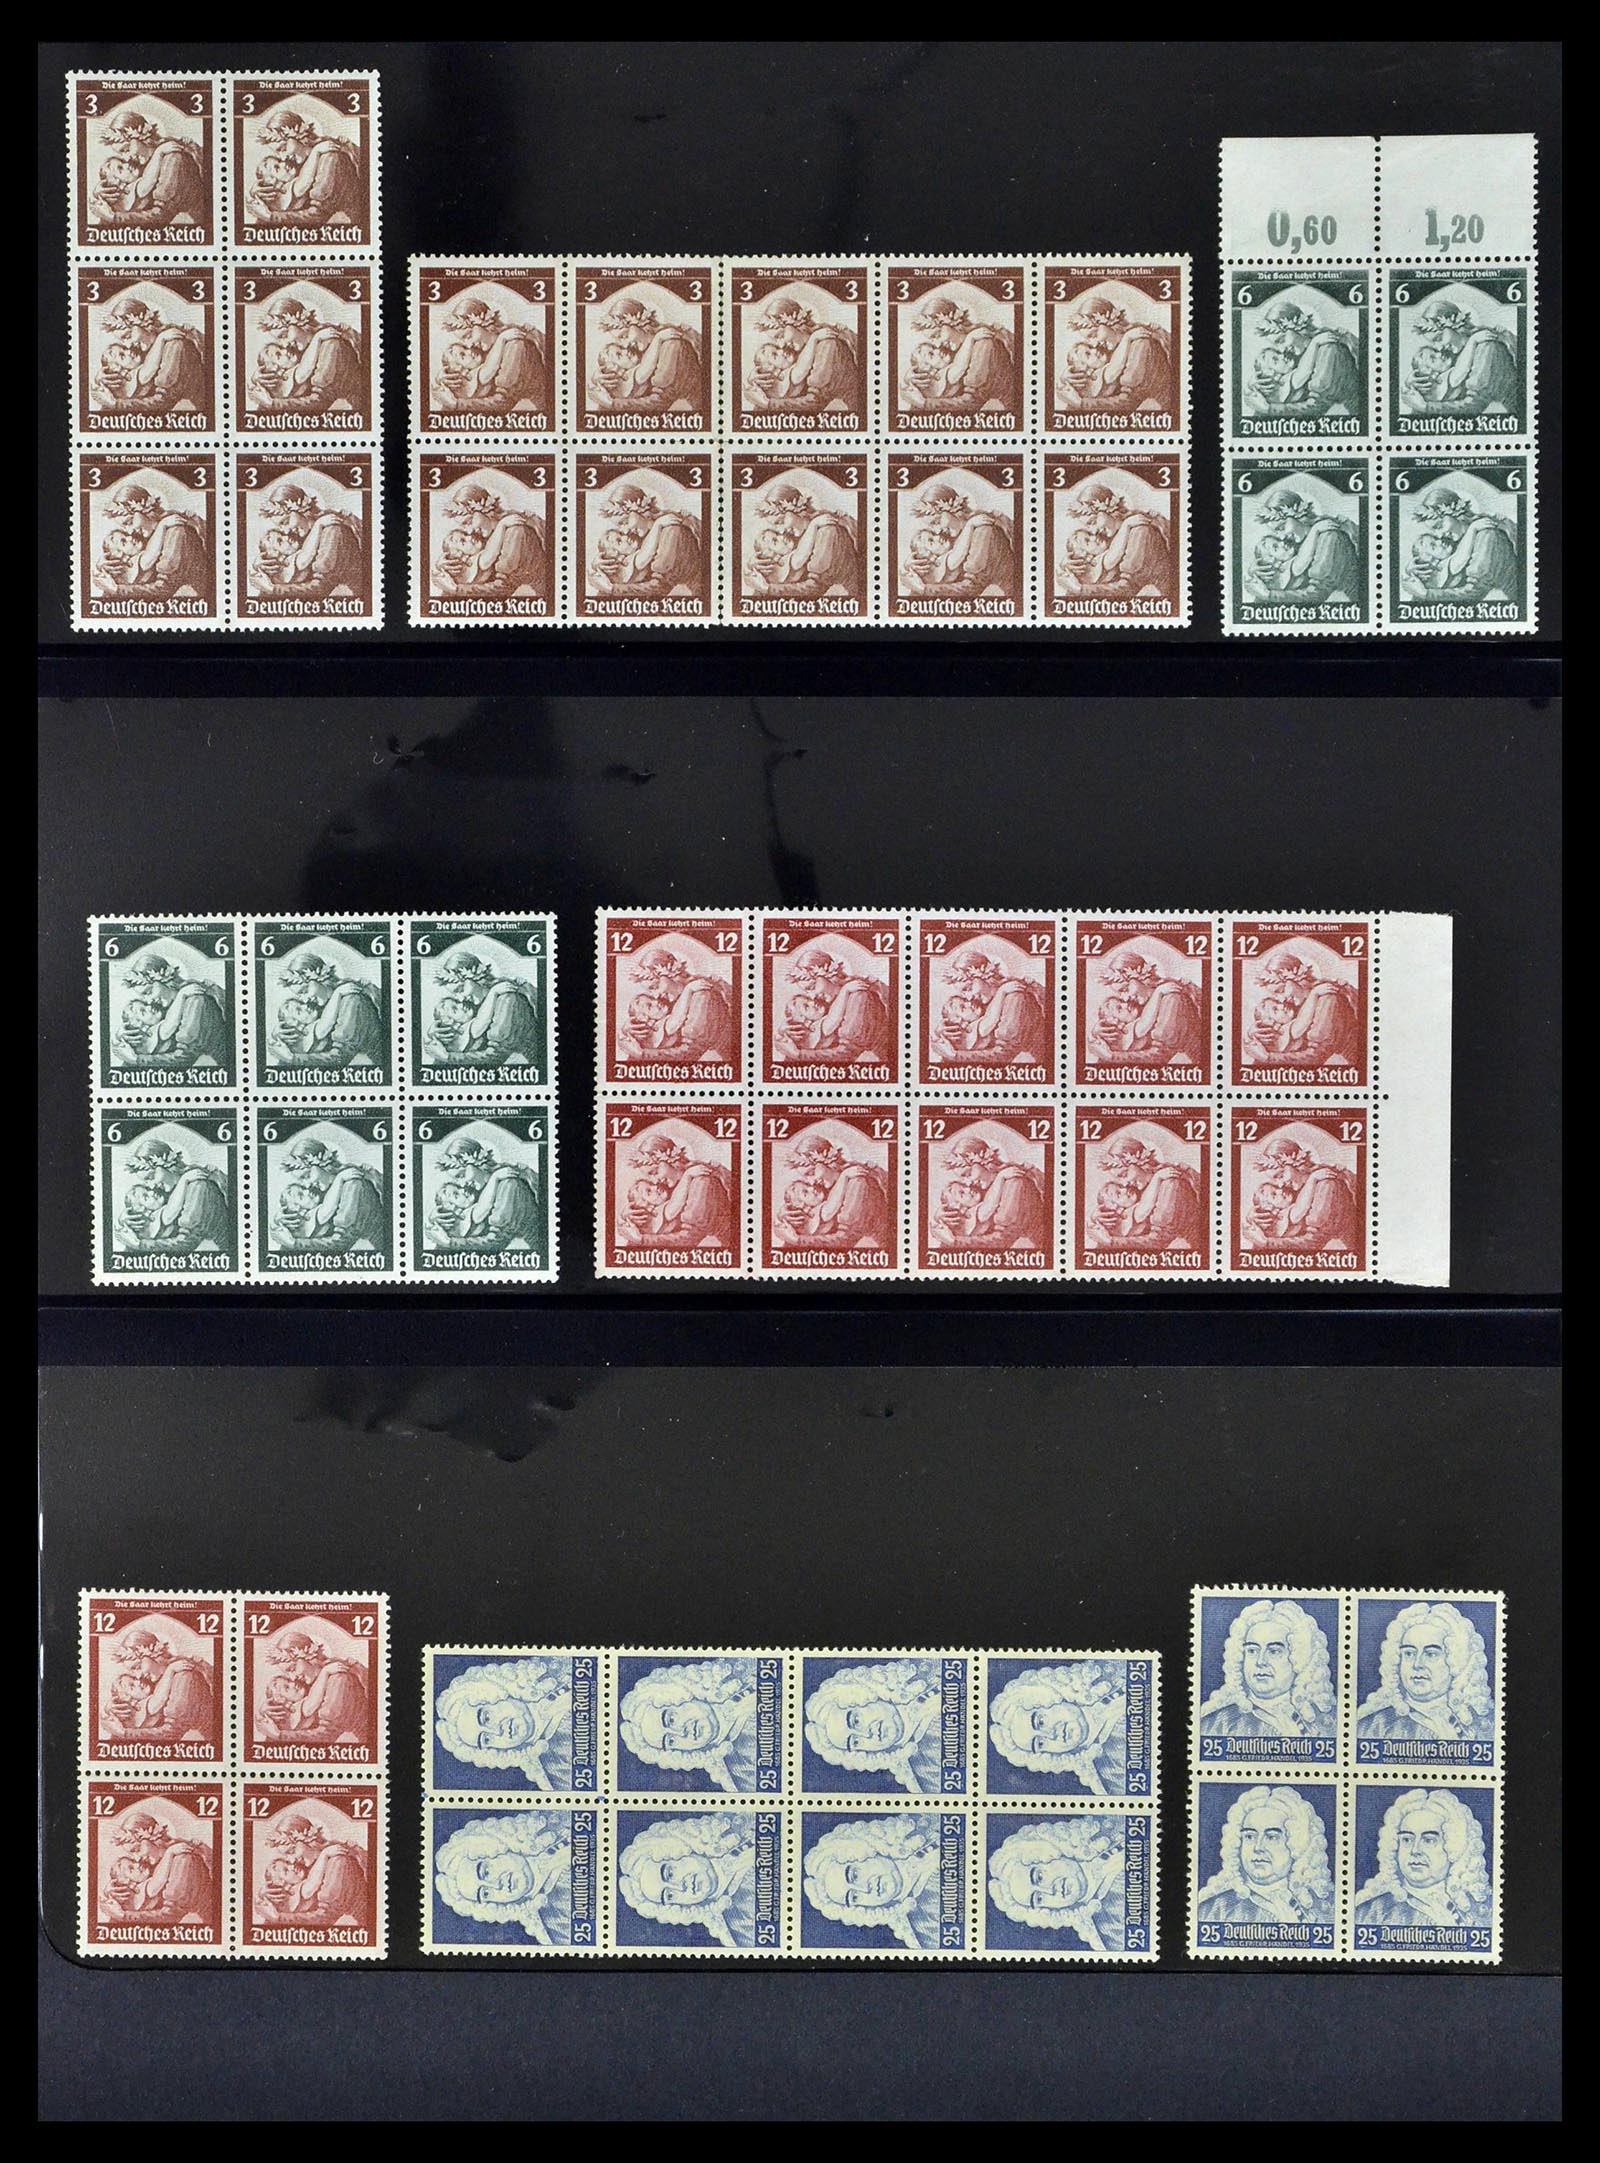 39255 0016 - Stamp collection 39255 German Reich MNH blocks of 4.